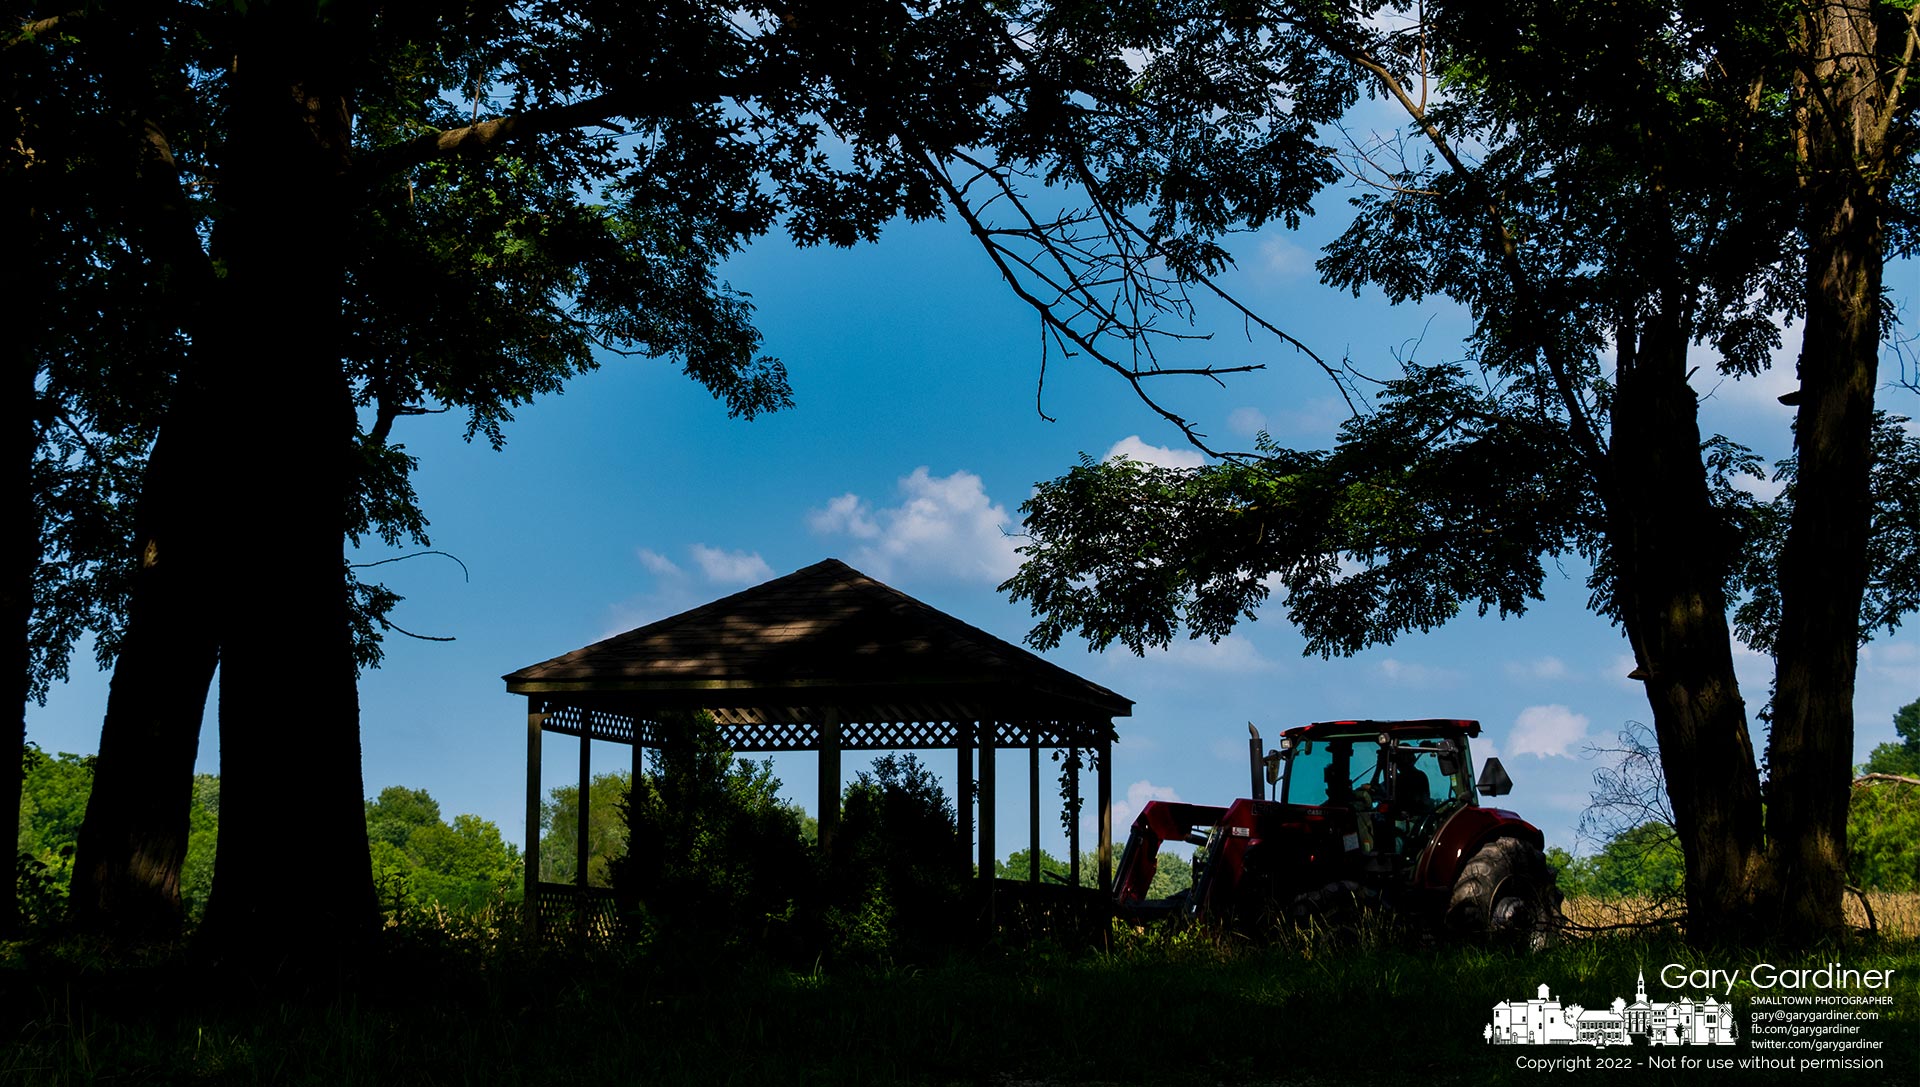 Kevin Scott runs his tractor pulling a hay mower through the afternoon shadows near the gazebo at the rear of the Sharp Farm home on Africa Road. My Final Photo for July 19, 2022.